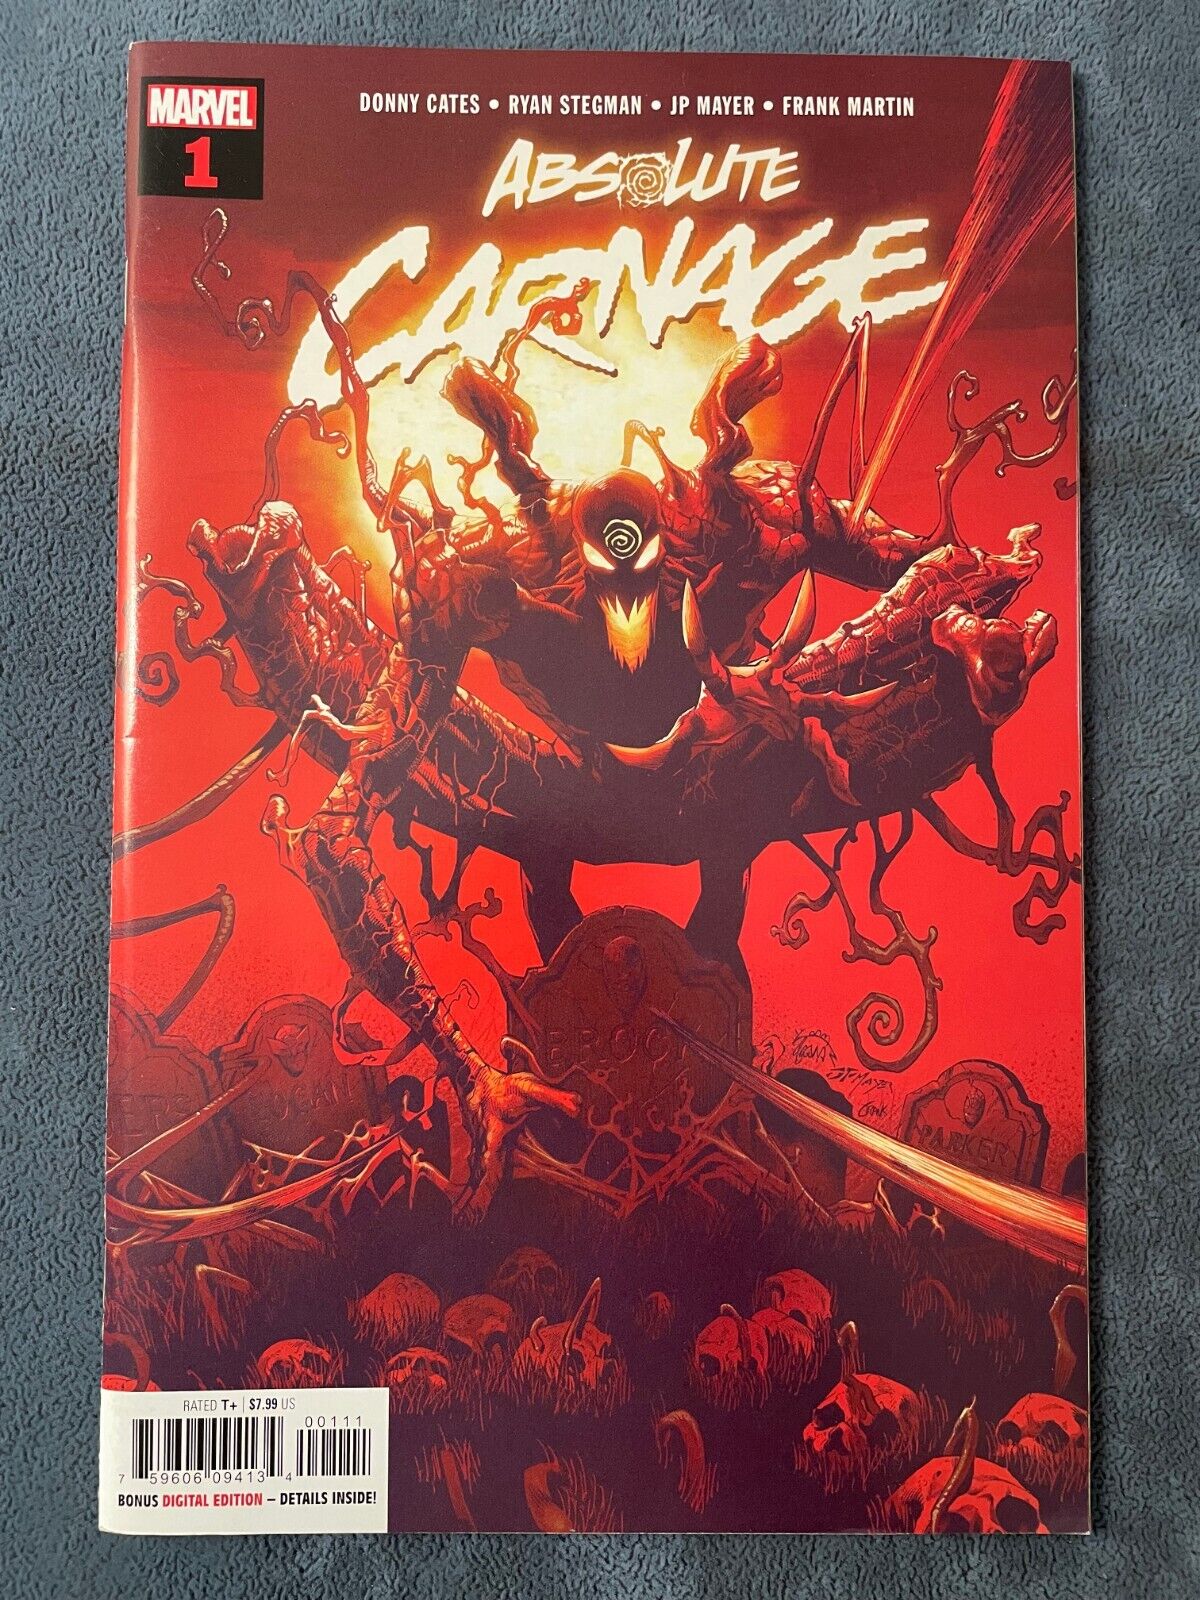 Absolute Carnage #1 2019 Marvel Comic Book Donny Cates Ryan Stegman Cover VF+